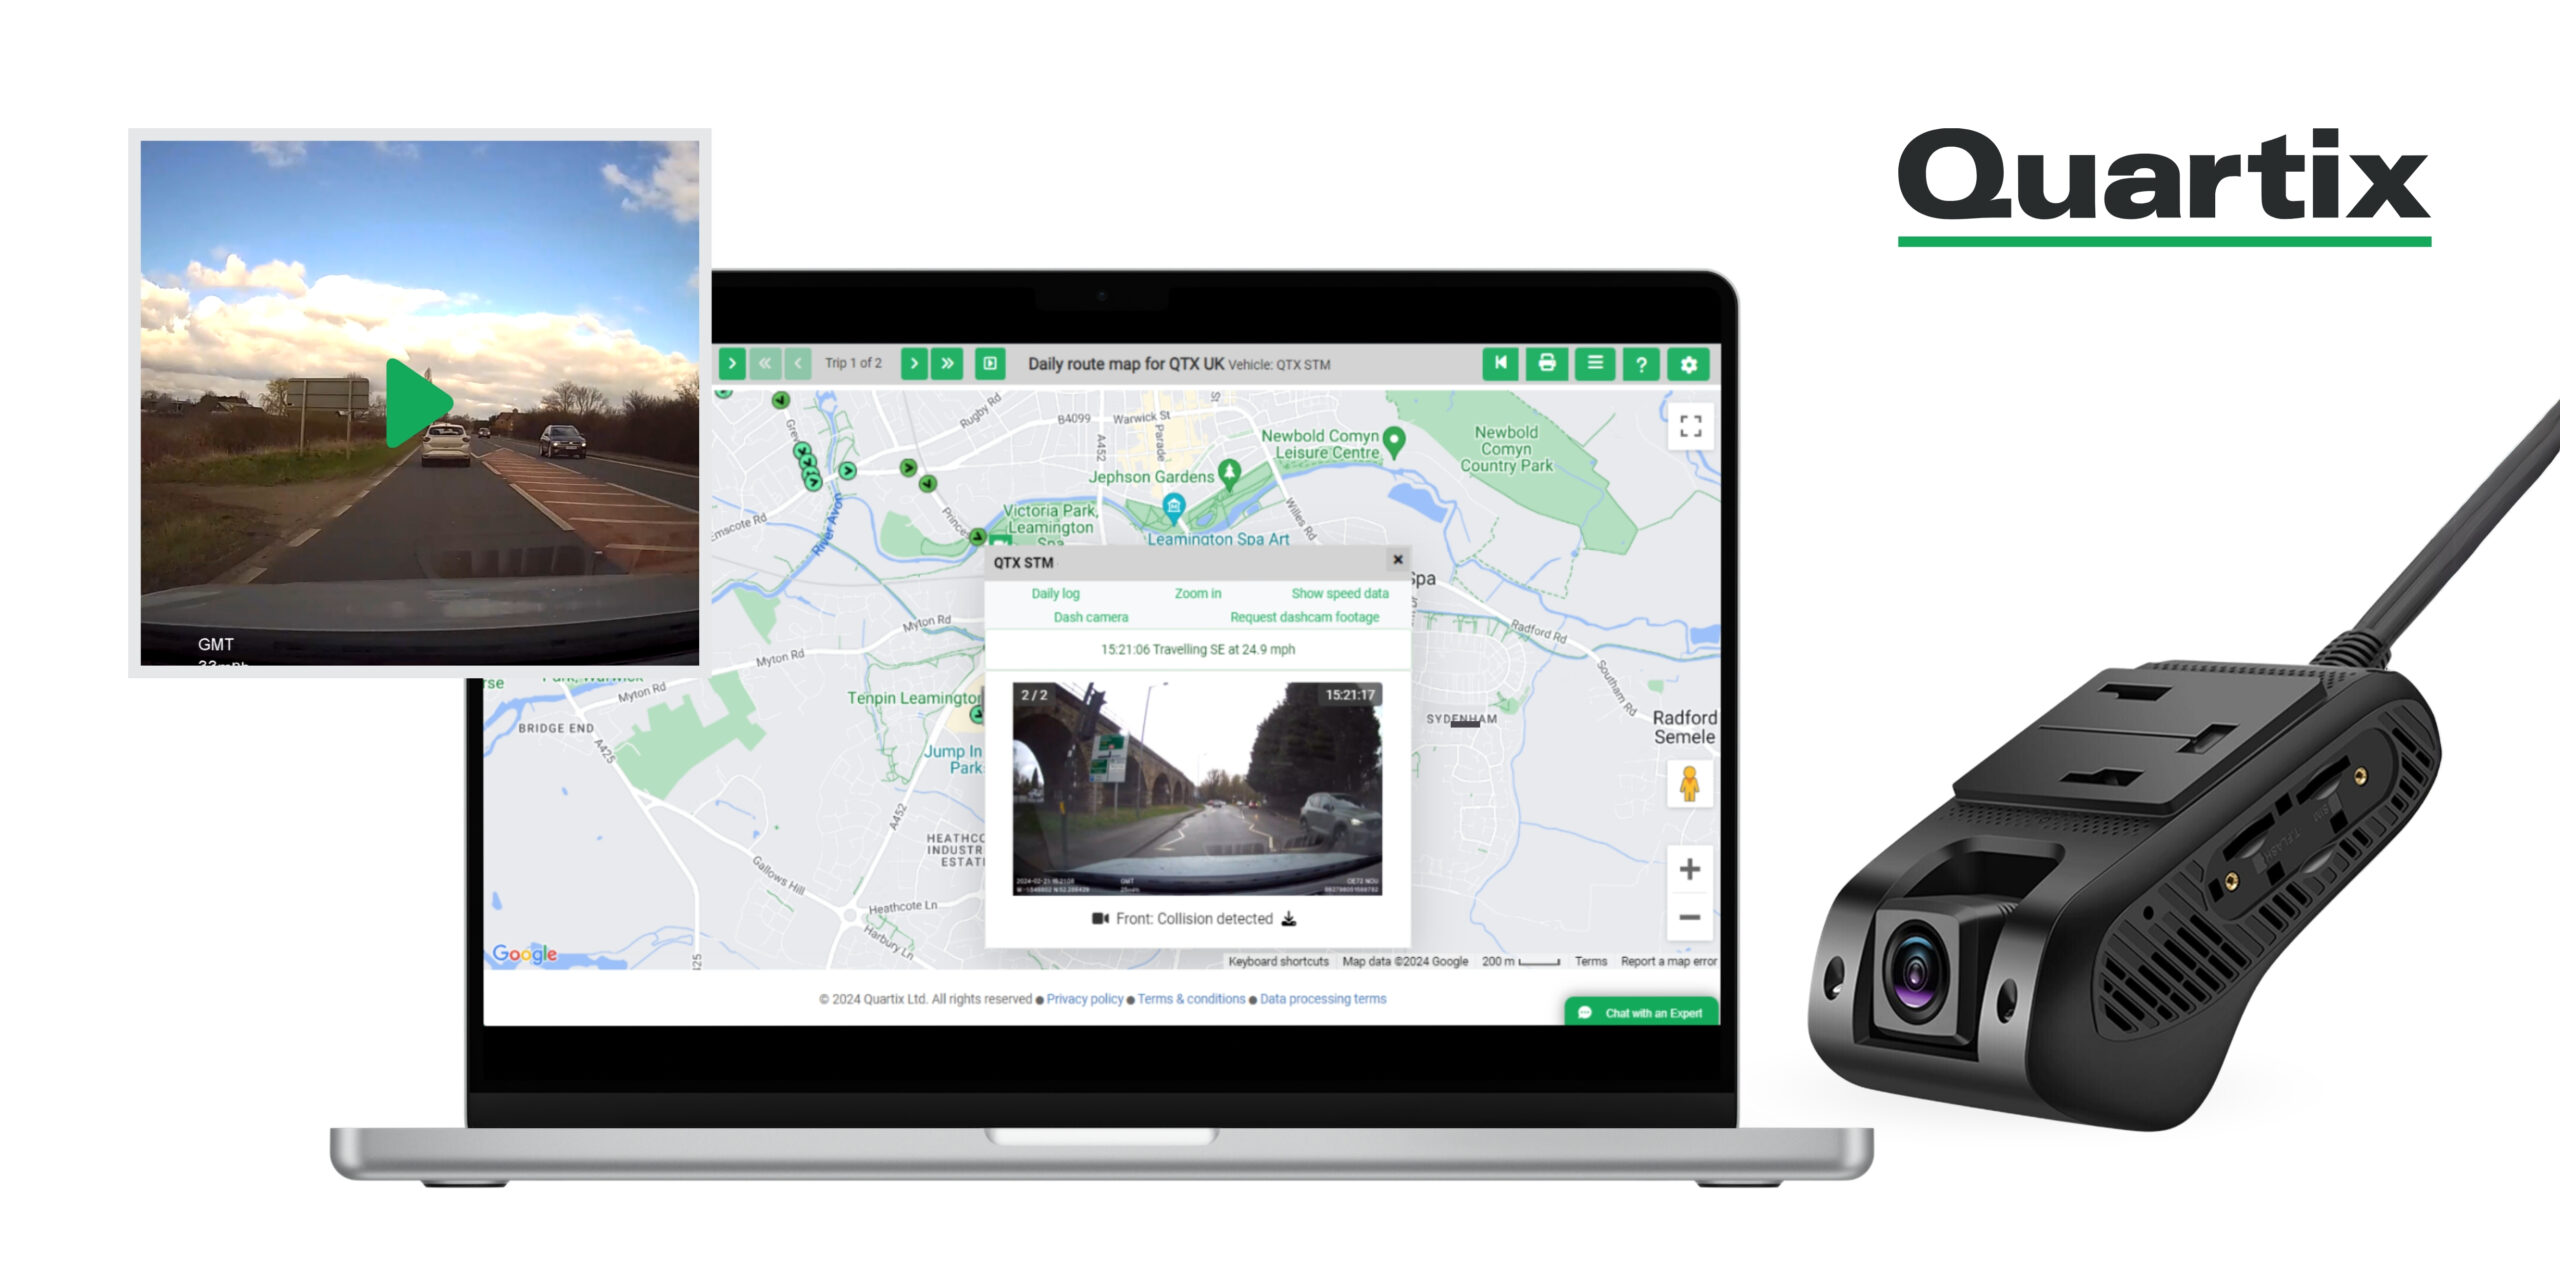 Quartix adds new affordable dashcam solution to its fast-growing telematics business